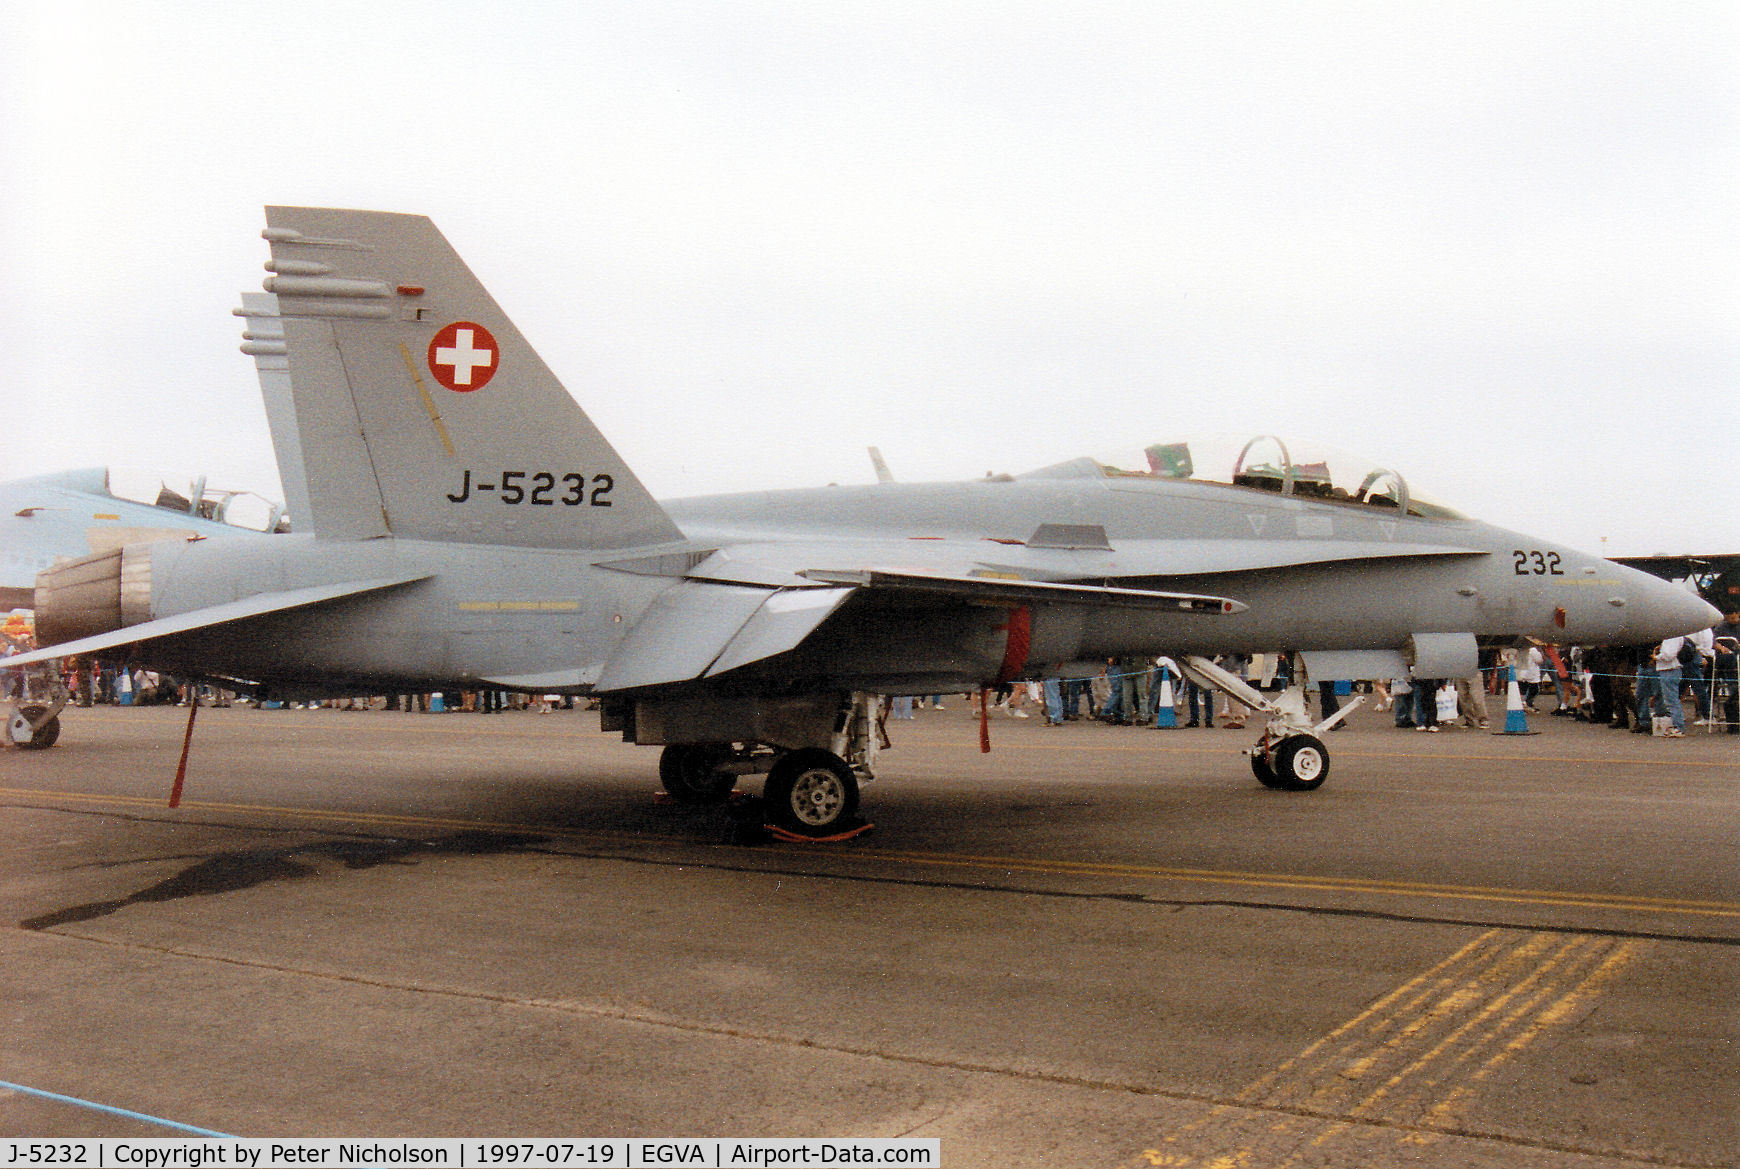 J-5232, 1996 McDonnell Douglas F/A-18D Hornet C/N 1308, Swiss Air Force F/A-18D Hornet on display at the 1997 Intnl Air Tattoo at RAF Fairford.